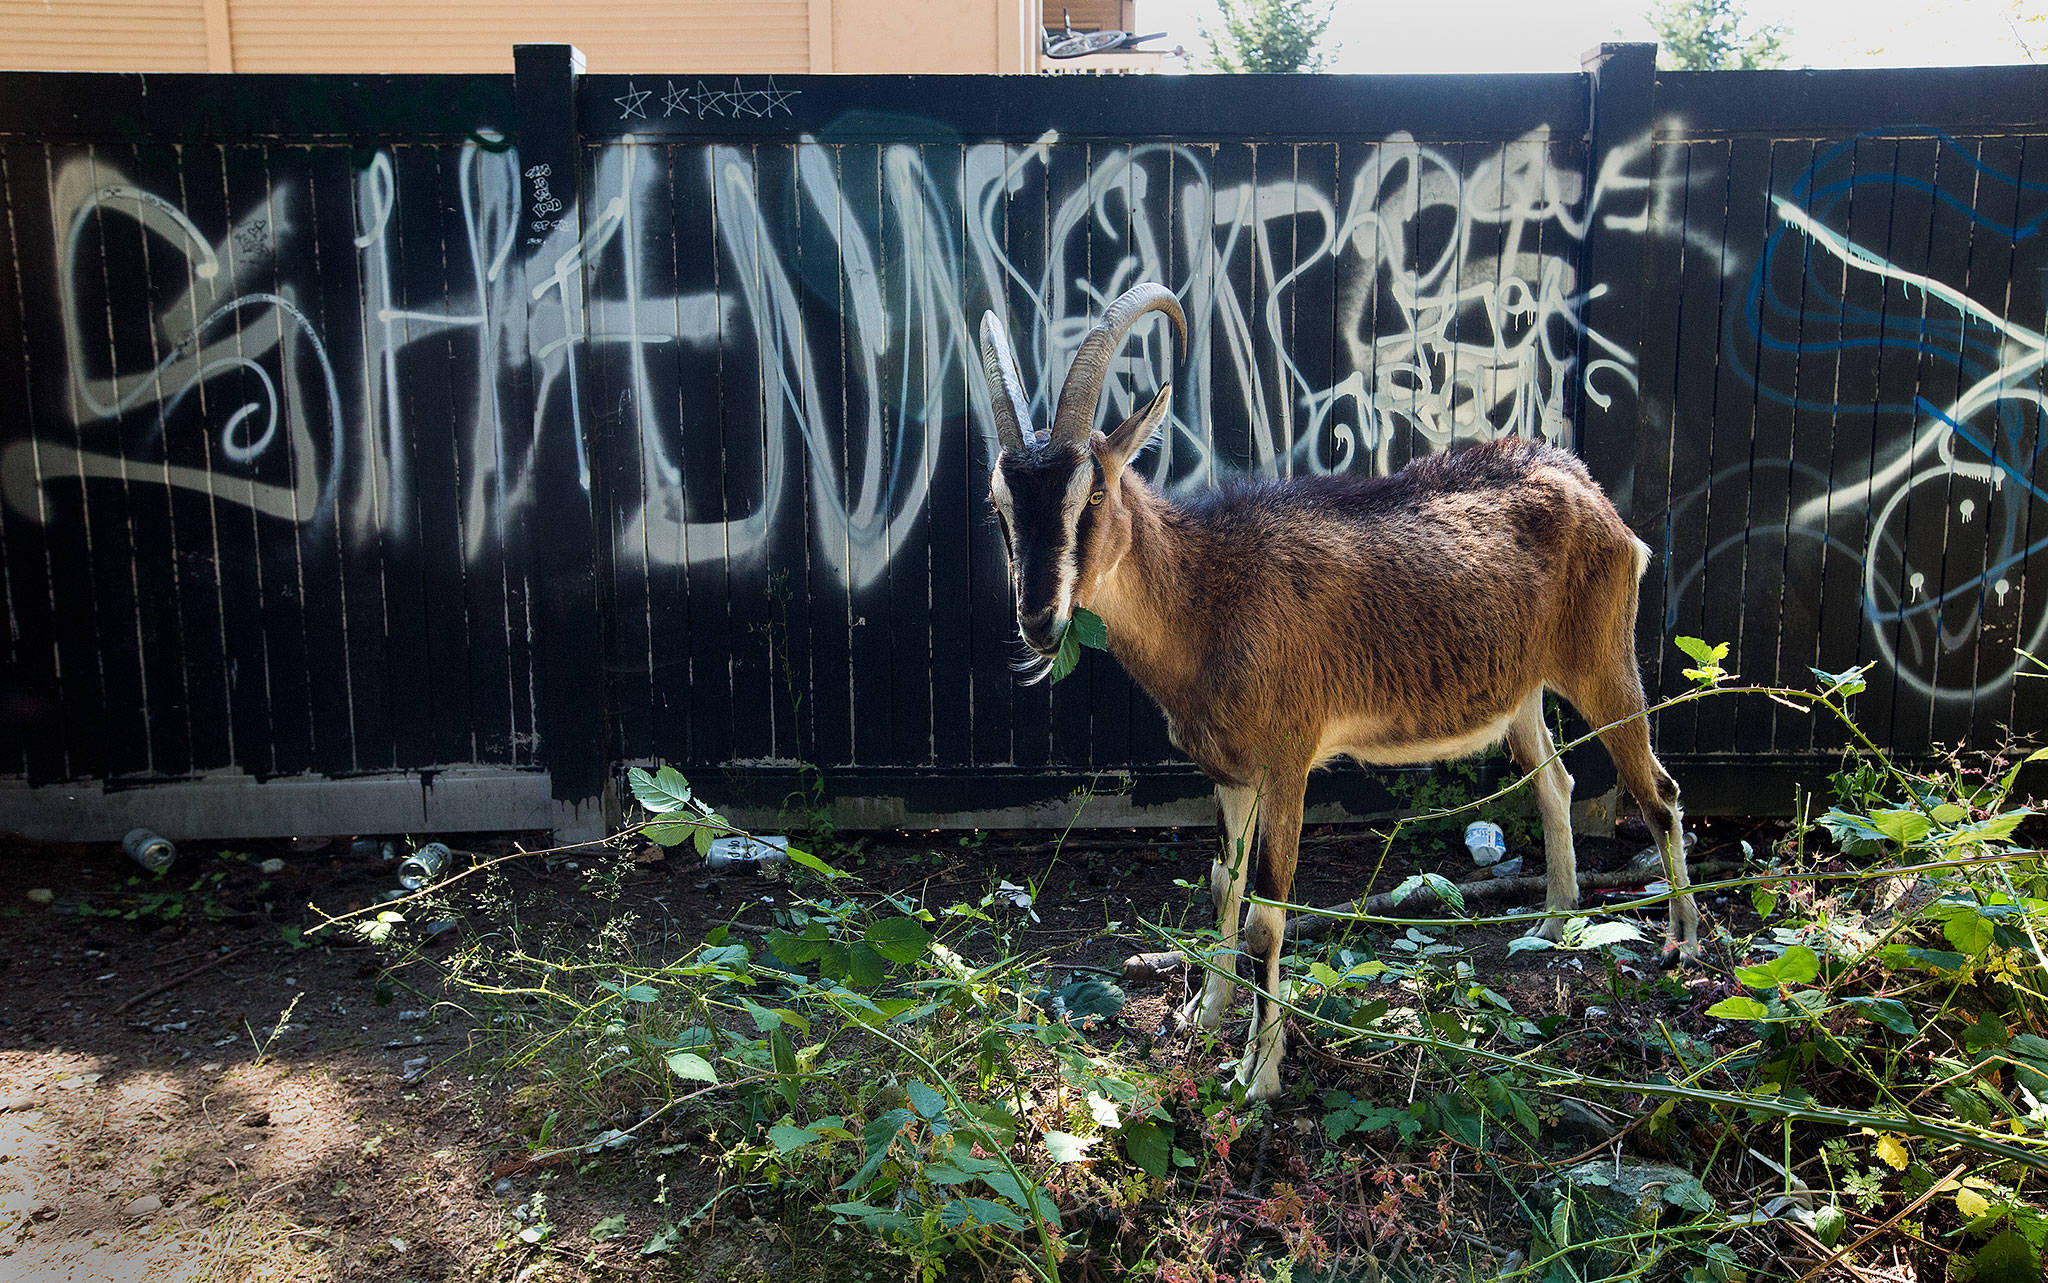 Huckleberry, an Alpine goat, chews on leaves along a graffitied fence behind the Fred Meyer on Evergreen Way on Wednesday in Everett. Huckleberry was one of the 120 goats, from Rent-a-Ruminant LLC, used to clear out heavy vegetation in an eco-friendly way. (Andy Bronson / The Herald)